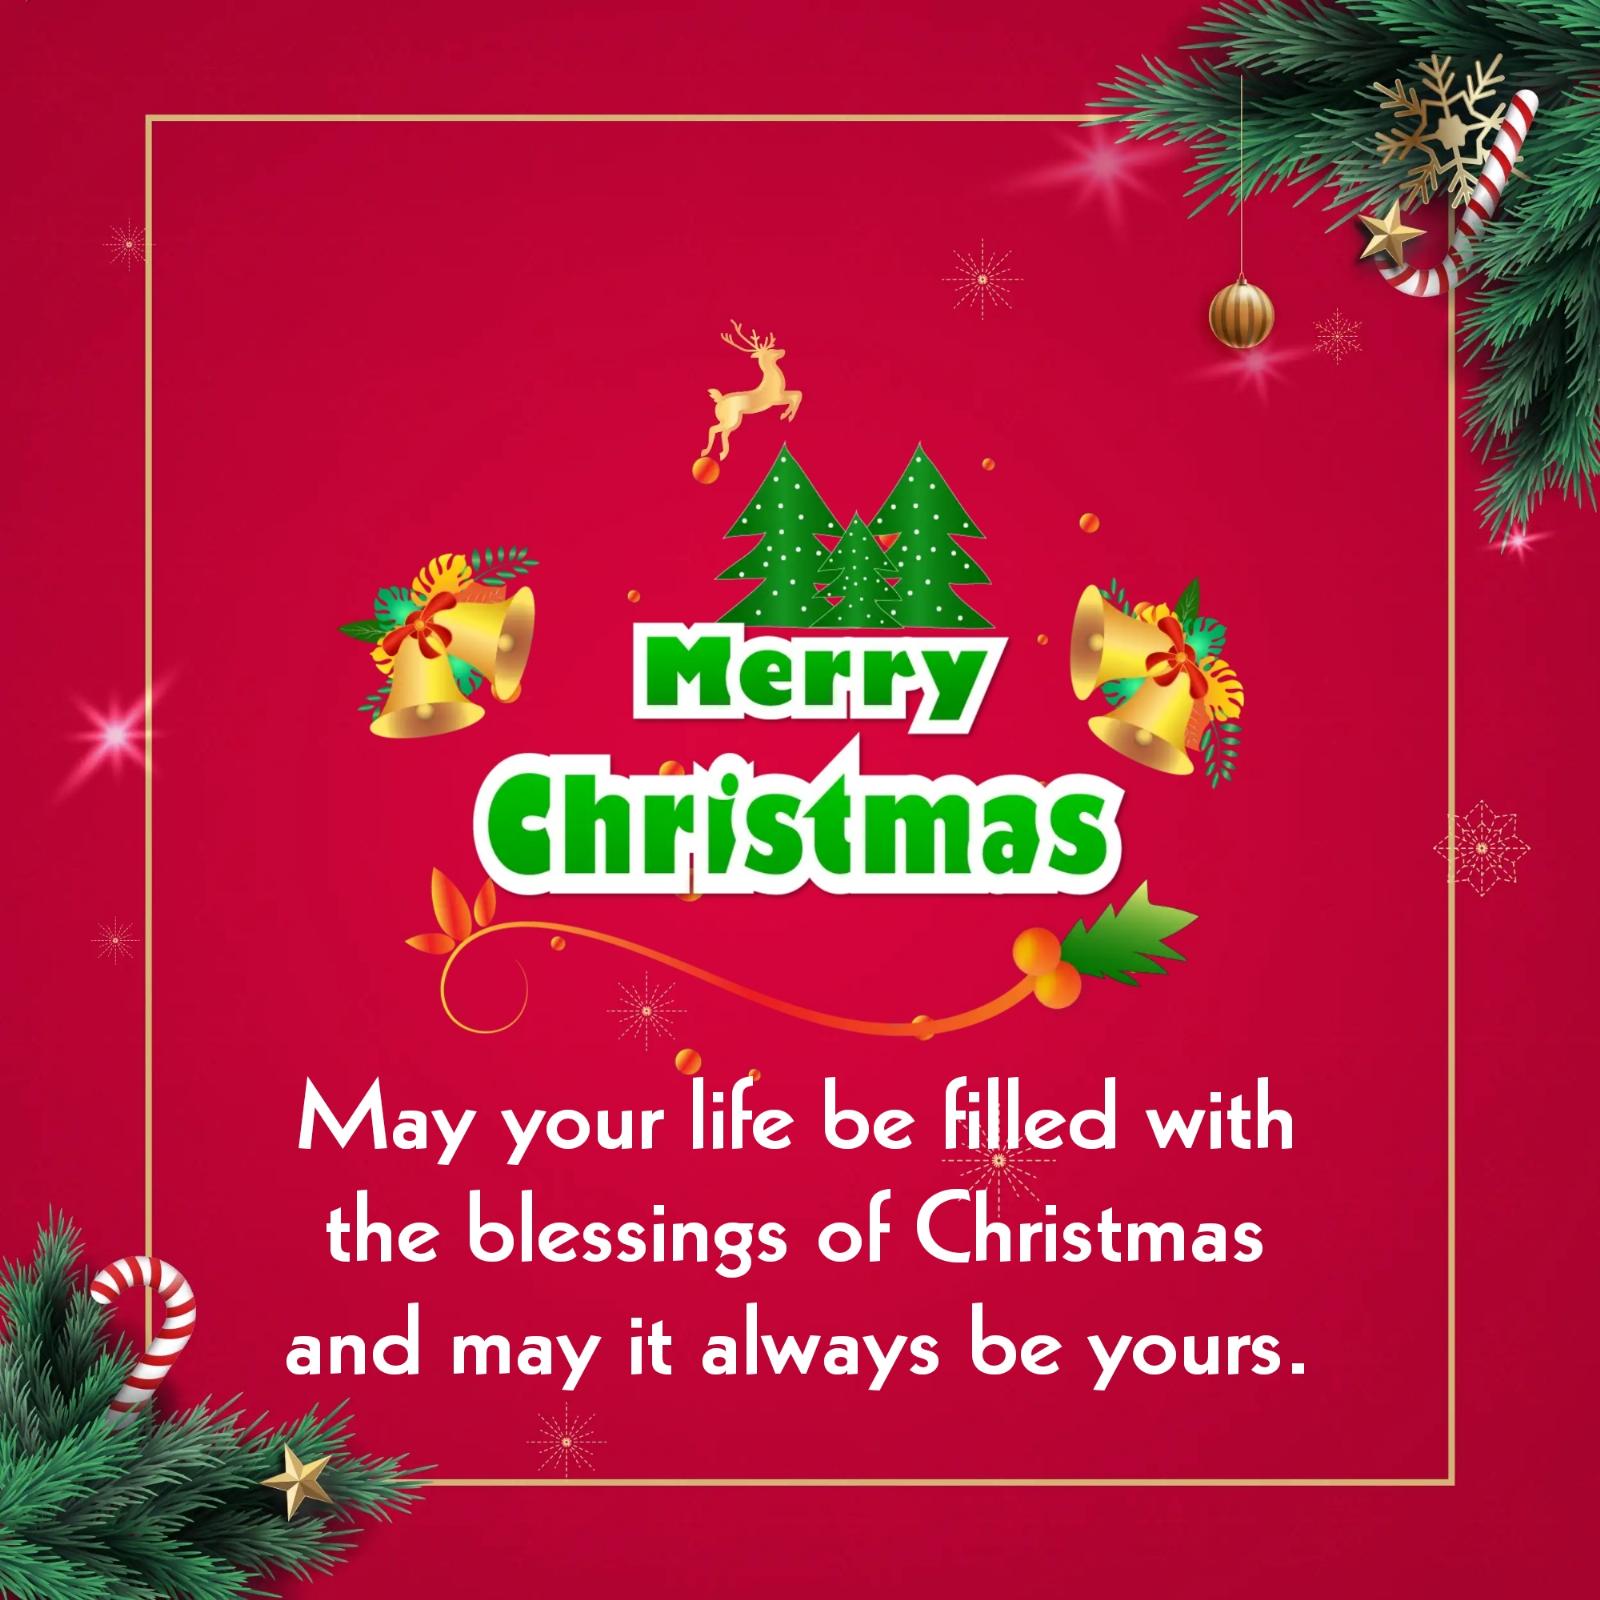 May your life be filled with the blessings of Christmas